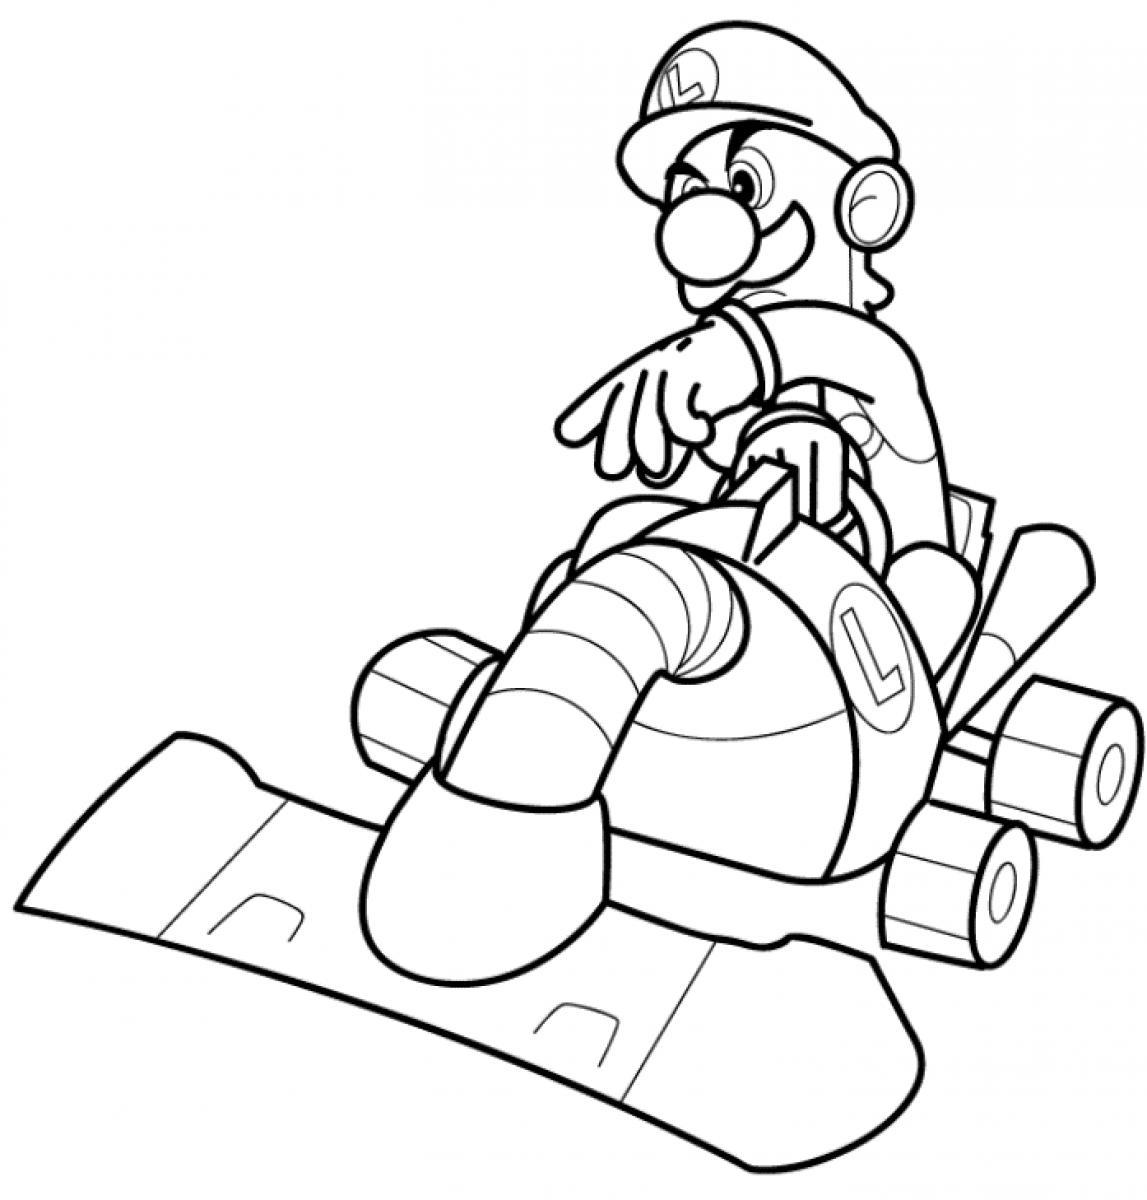 Free Printable Luigi Coloring Pages For Kids